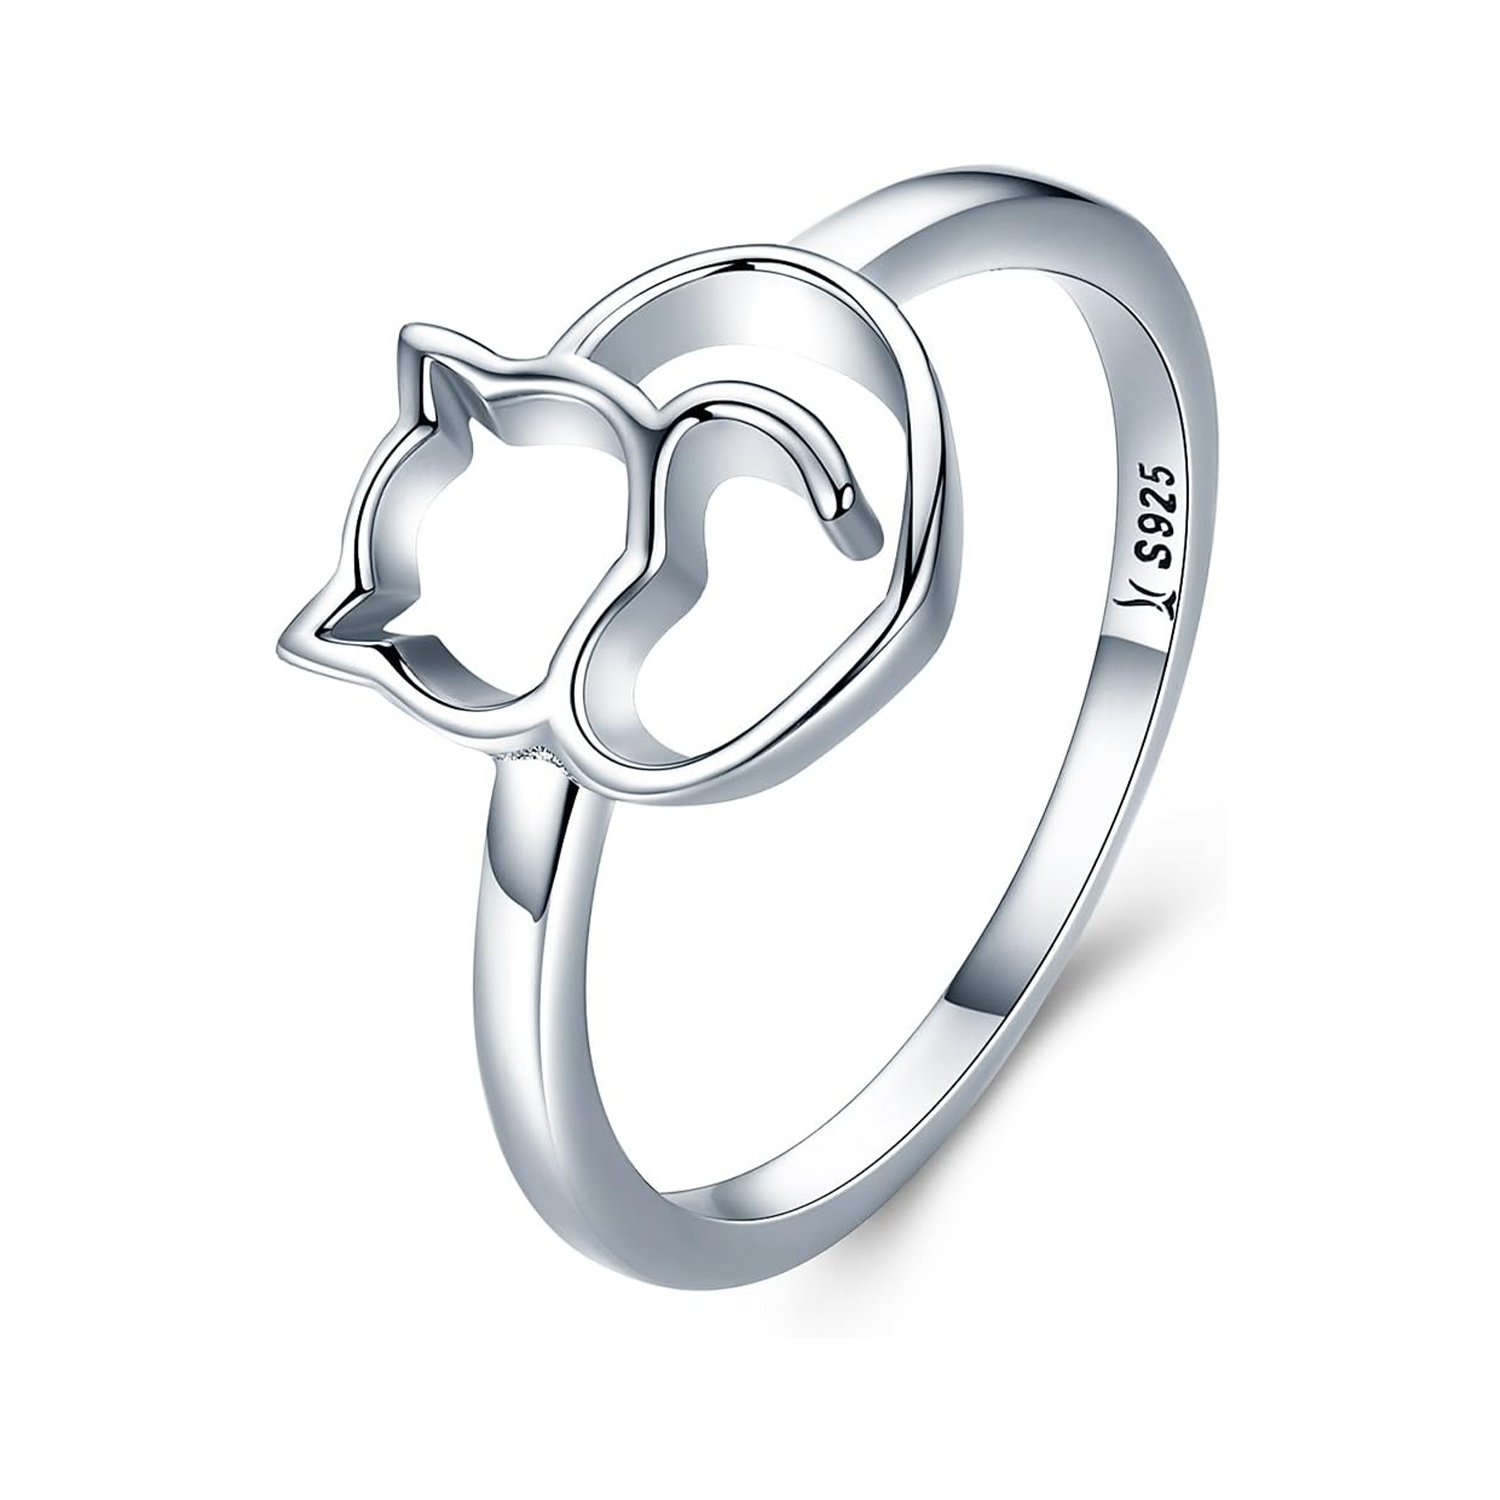 NEW  925 Sterling Silver Kitty Cat Statement Ring